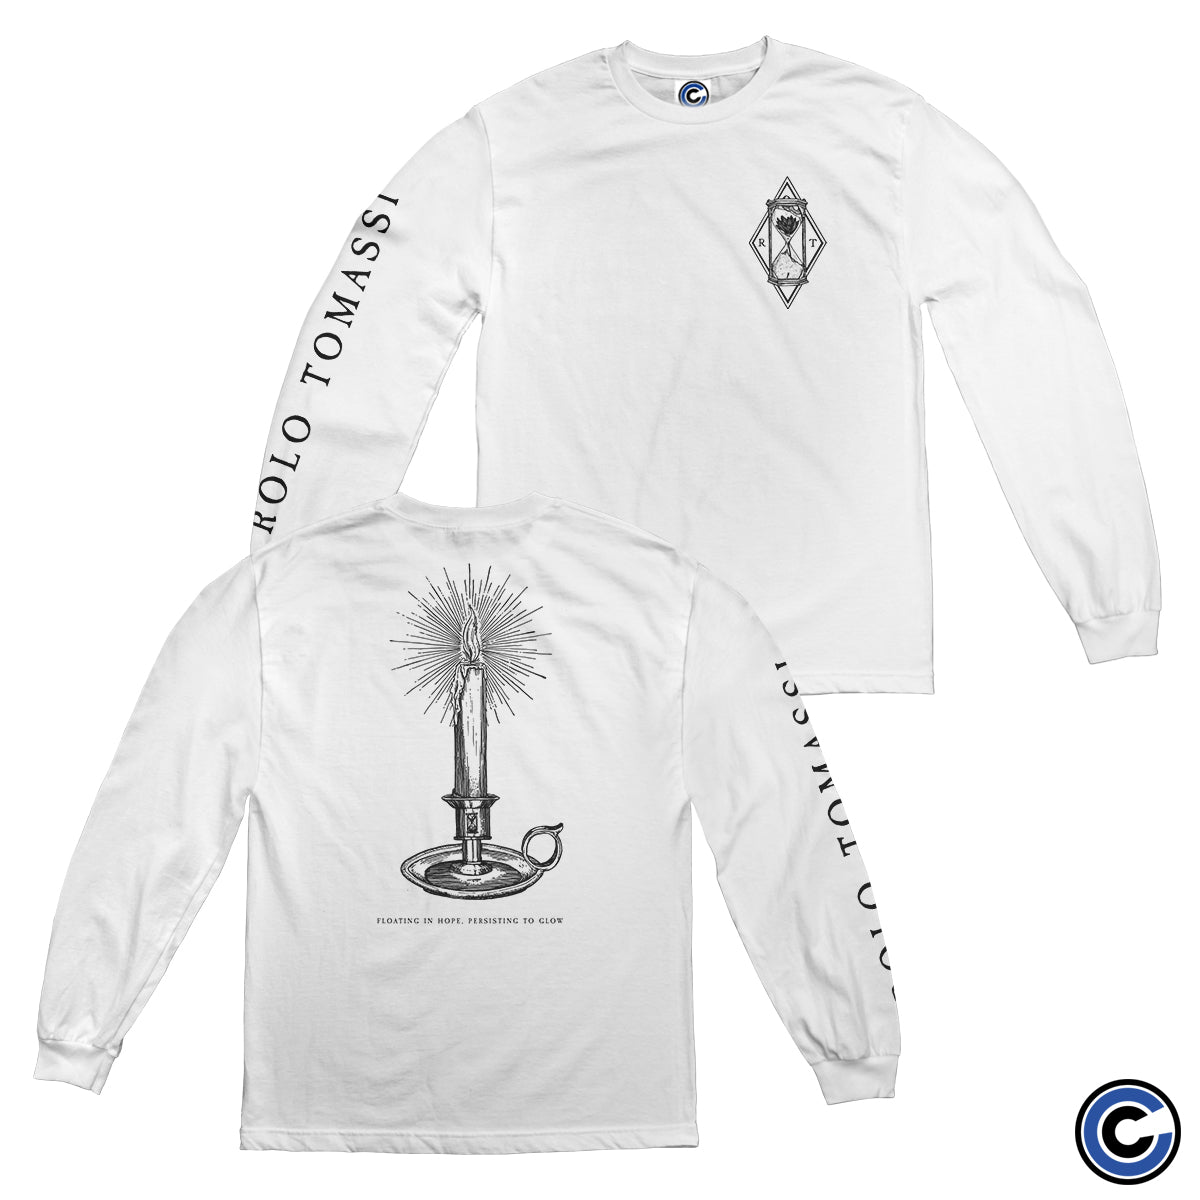 Rolo Tomassi "Floating In Hope" Long Sleeve